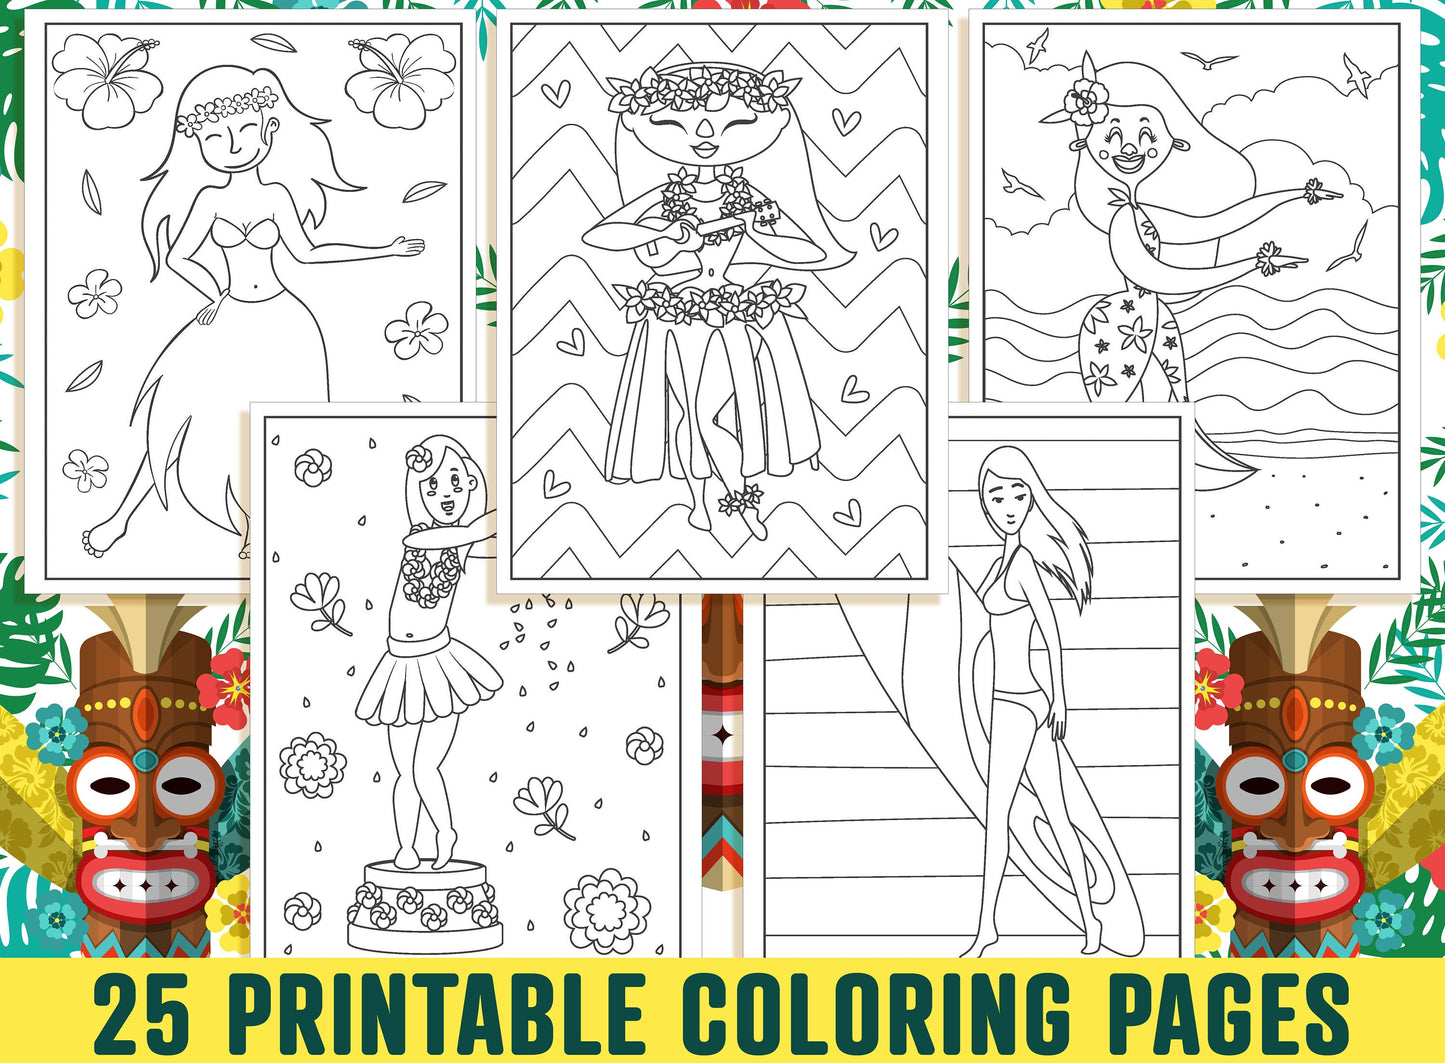 Island Girl Coloring Pages, 25 Printable Island Girl Coloring Pages for Kids, Girls, & Teens. Hawaiian Girl, Tiki Totems, Instant Download